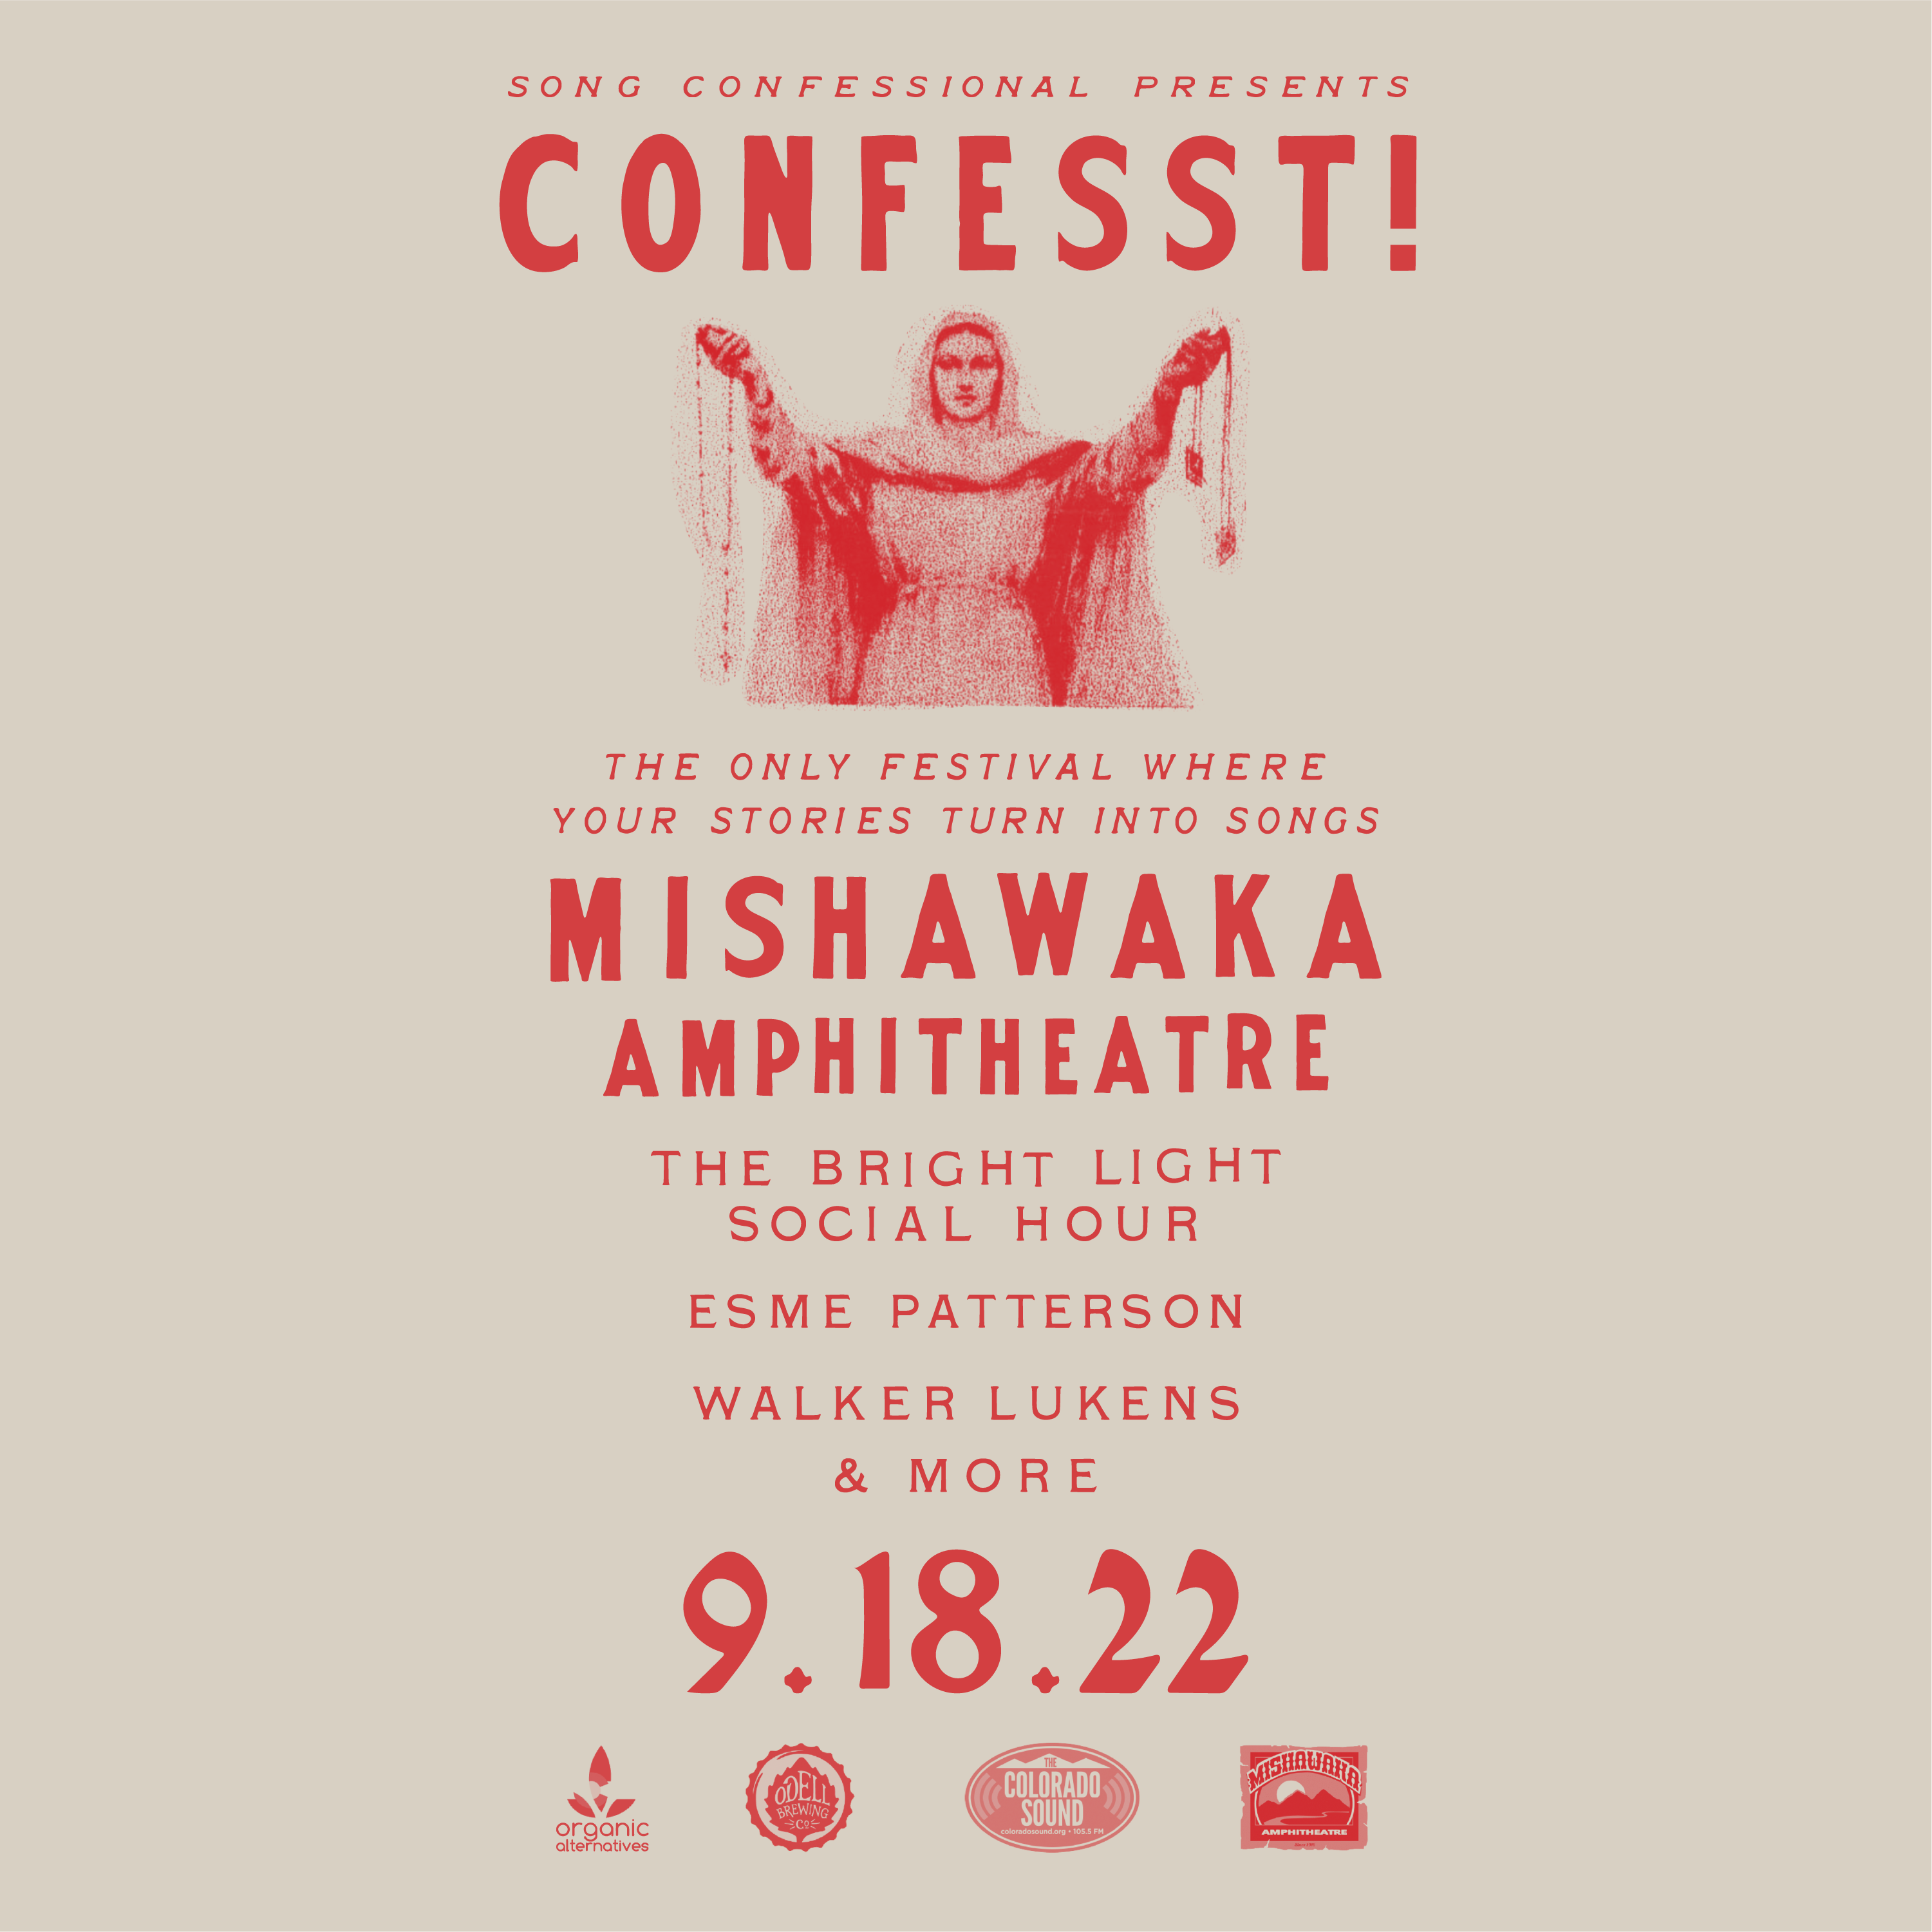 Song Confessional and Mishawaka Amphitheatre Announce Partnership, Inaugural One-Day Fest on September 18